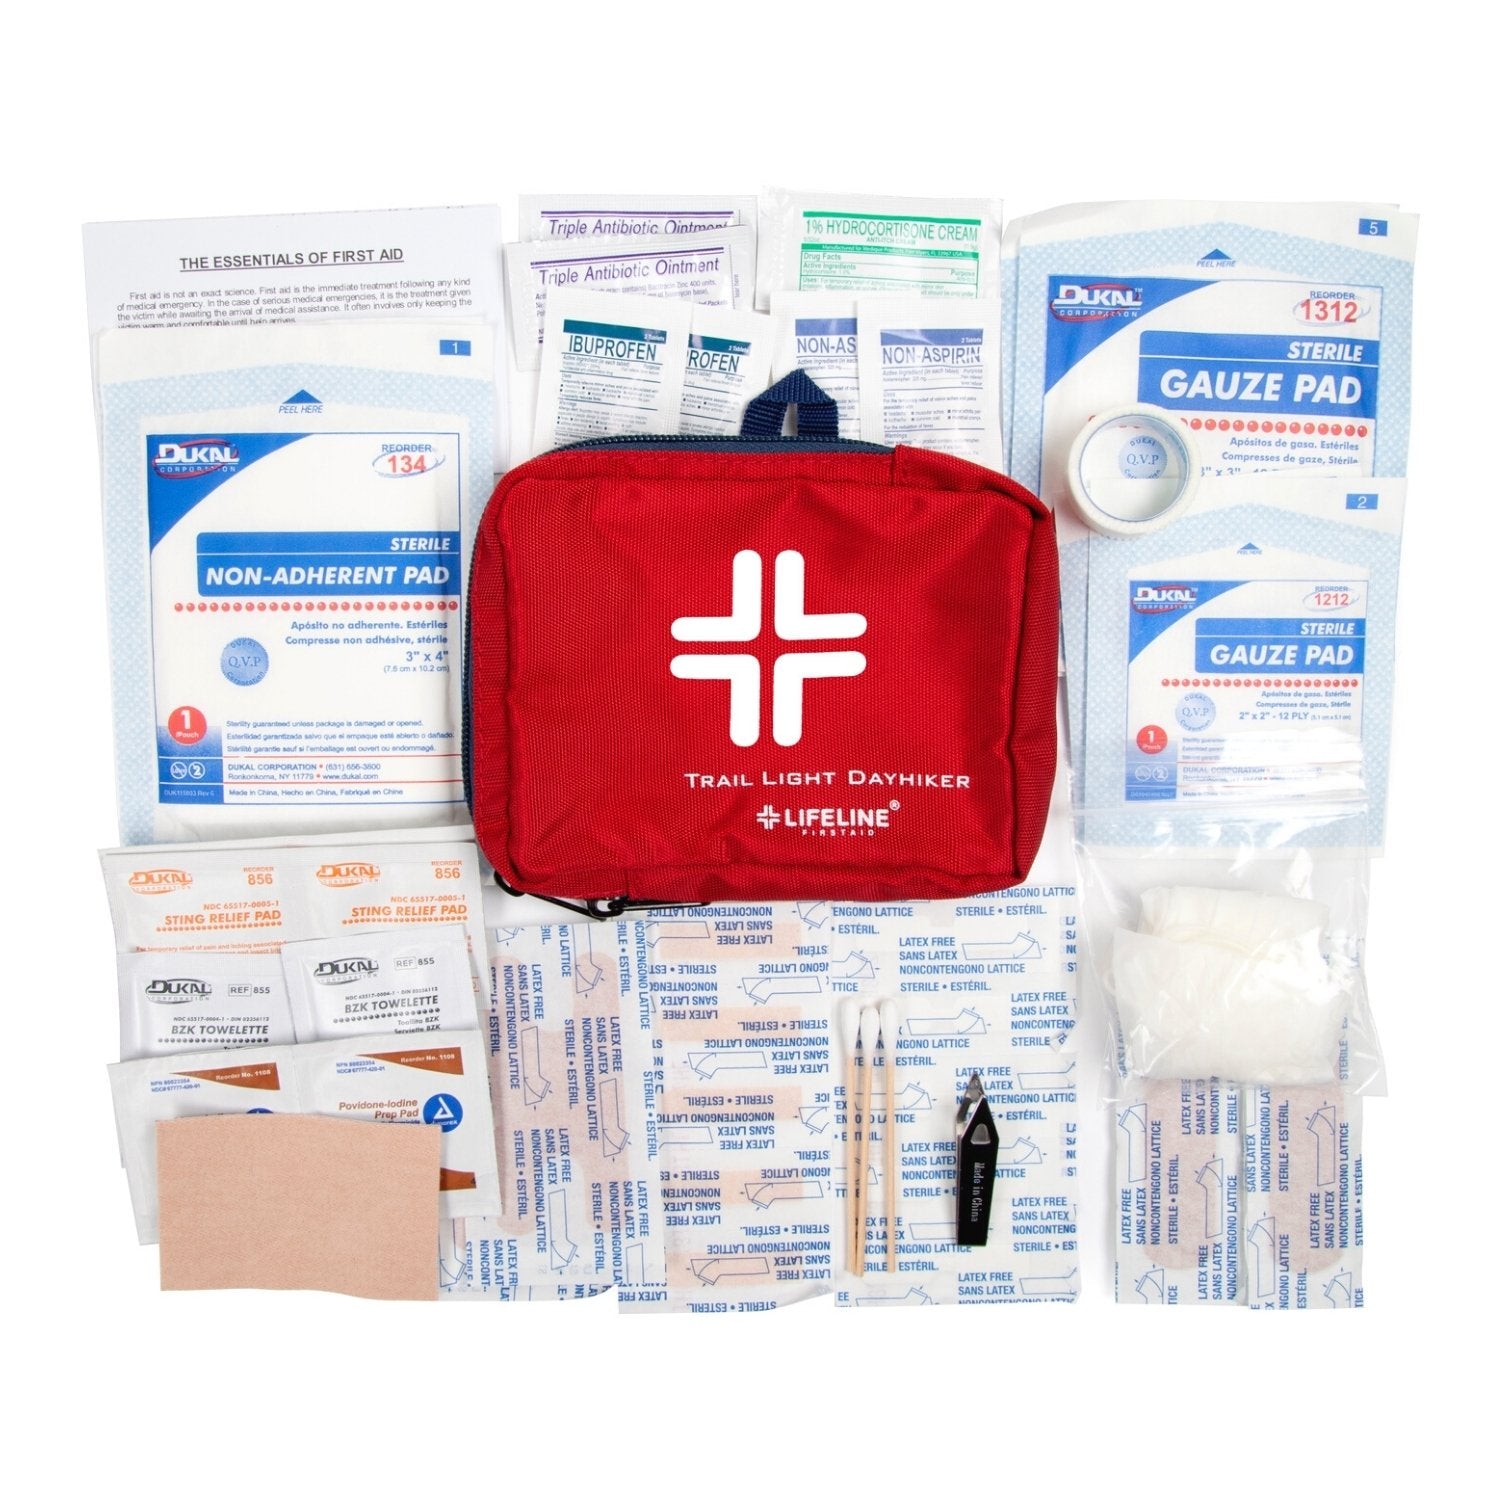 The MEDIC first aid kit - standard version with essential and trauma medical supplies